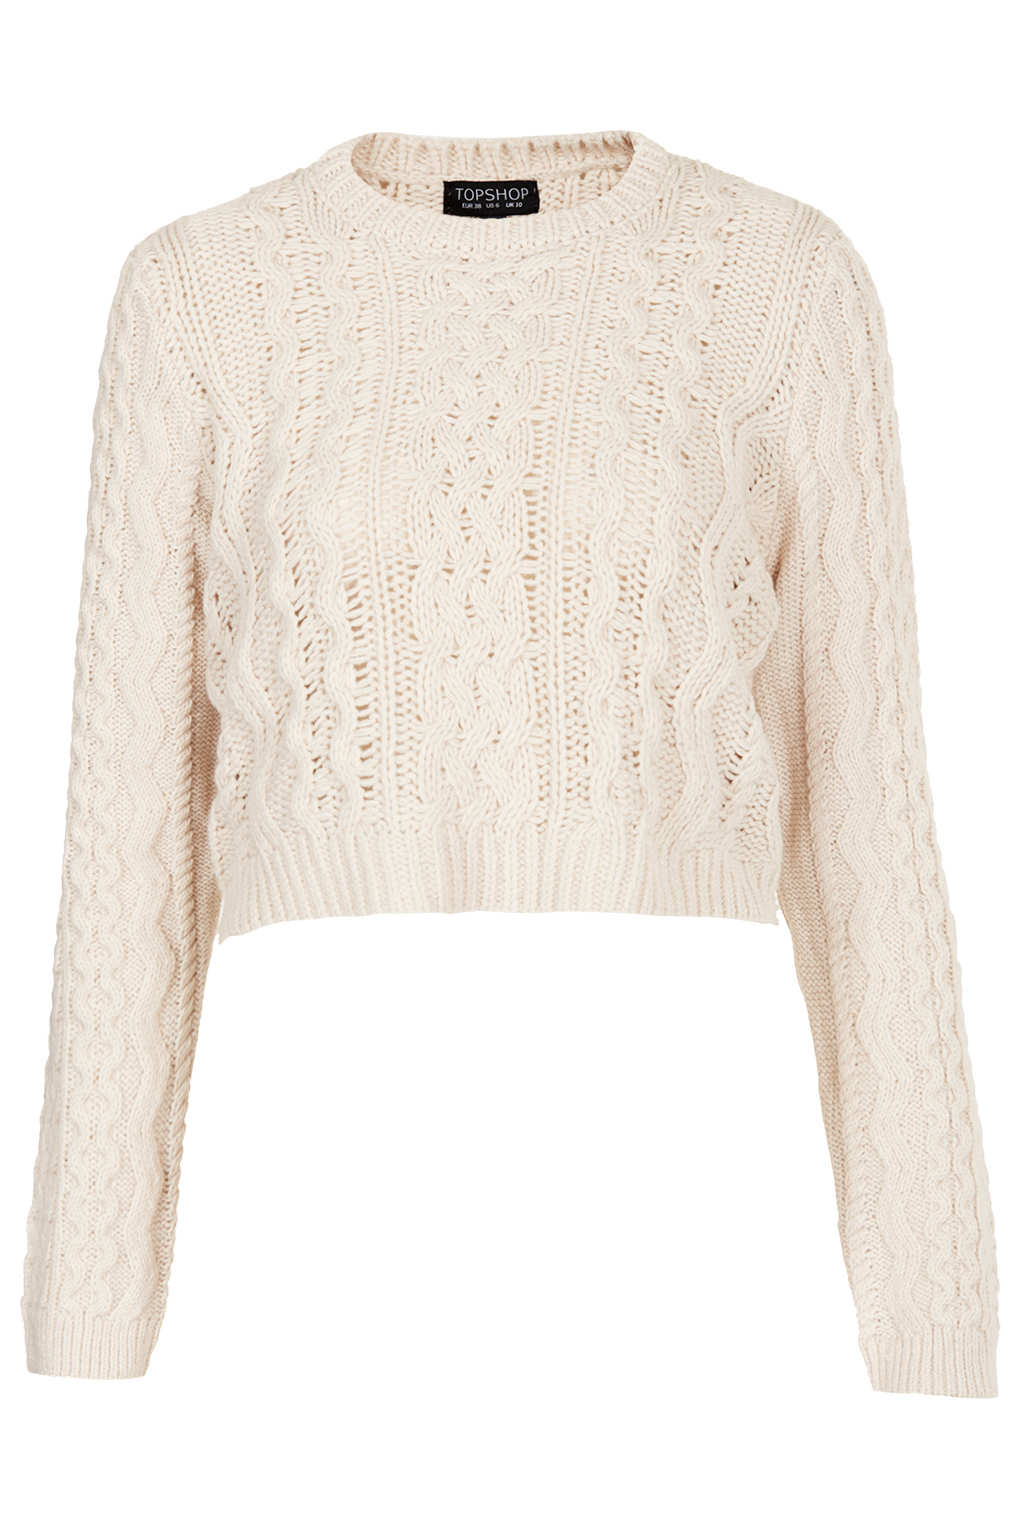 Topshop Knitted Crop Cable Jumper in Natural | Lyst